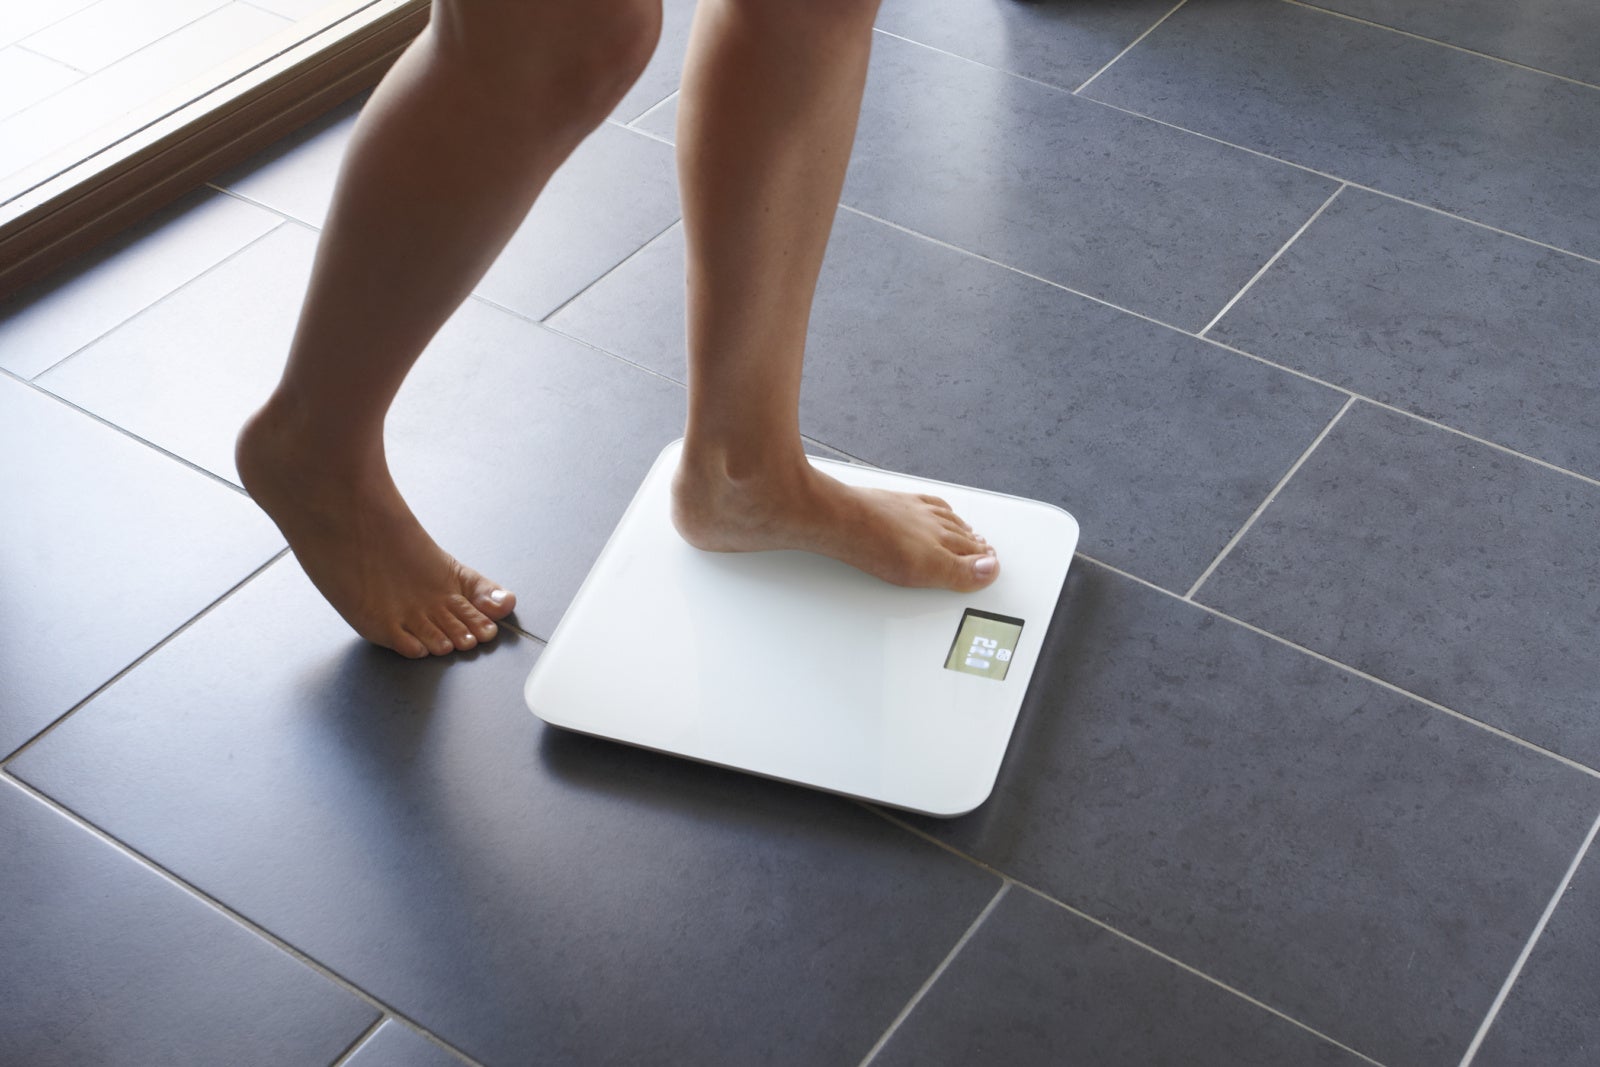 Woman Ingeniously Uses Weighing Scale She Bought for BF To Prove That He's Cheating On Her - WORLD OF BUZZ 3